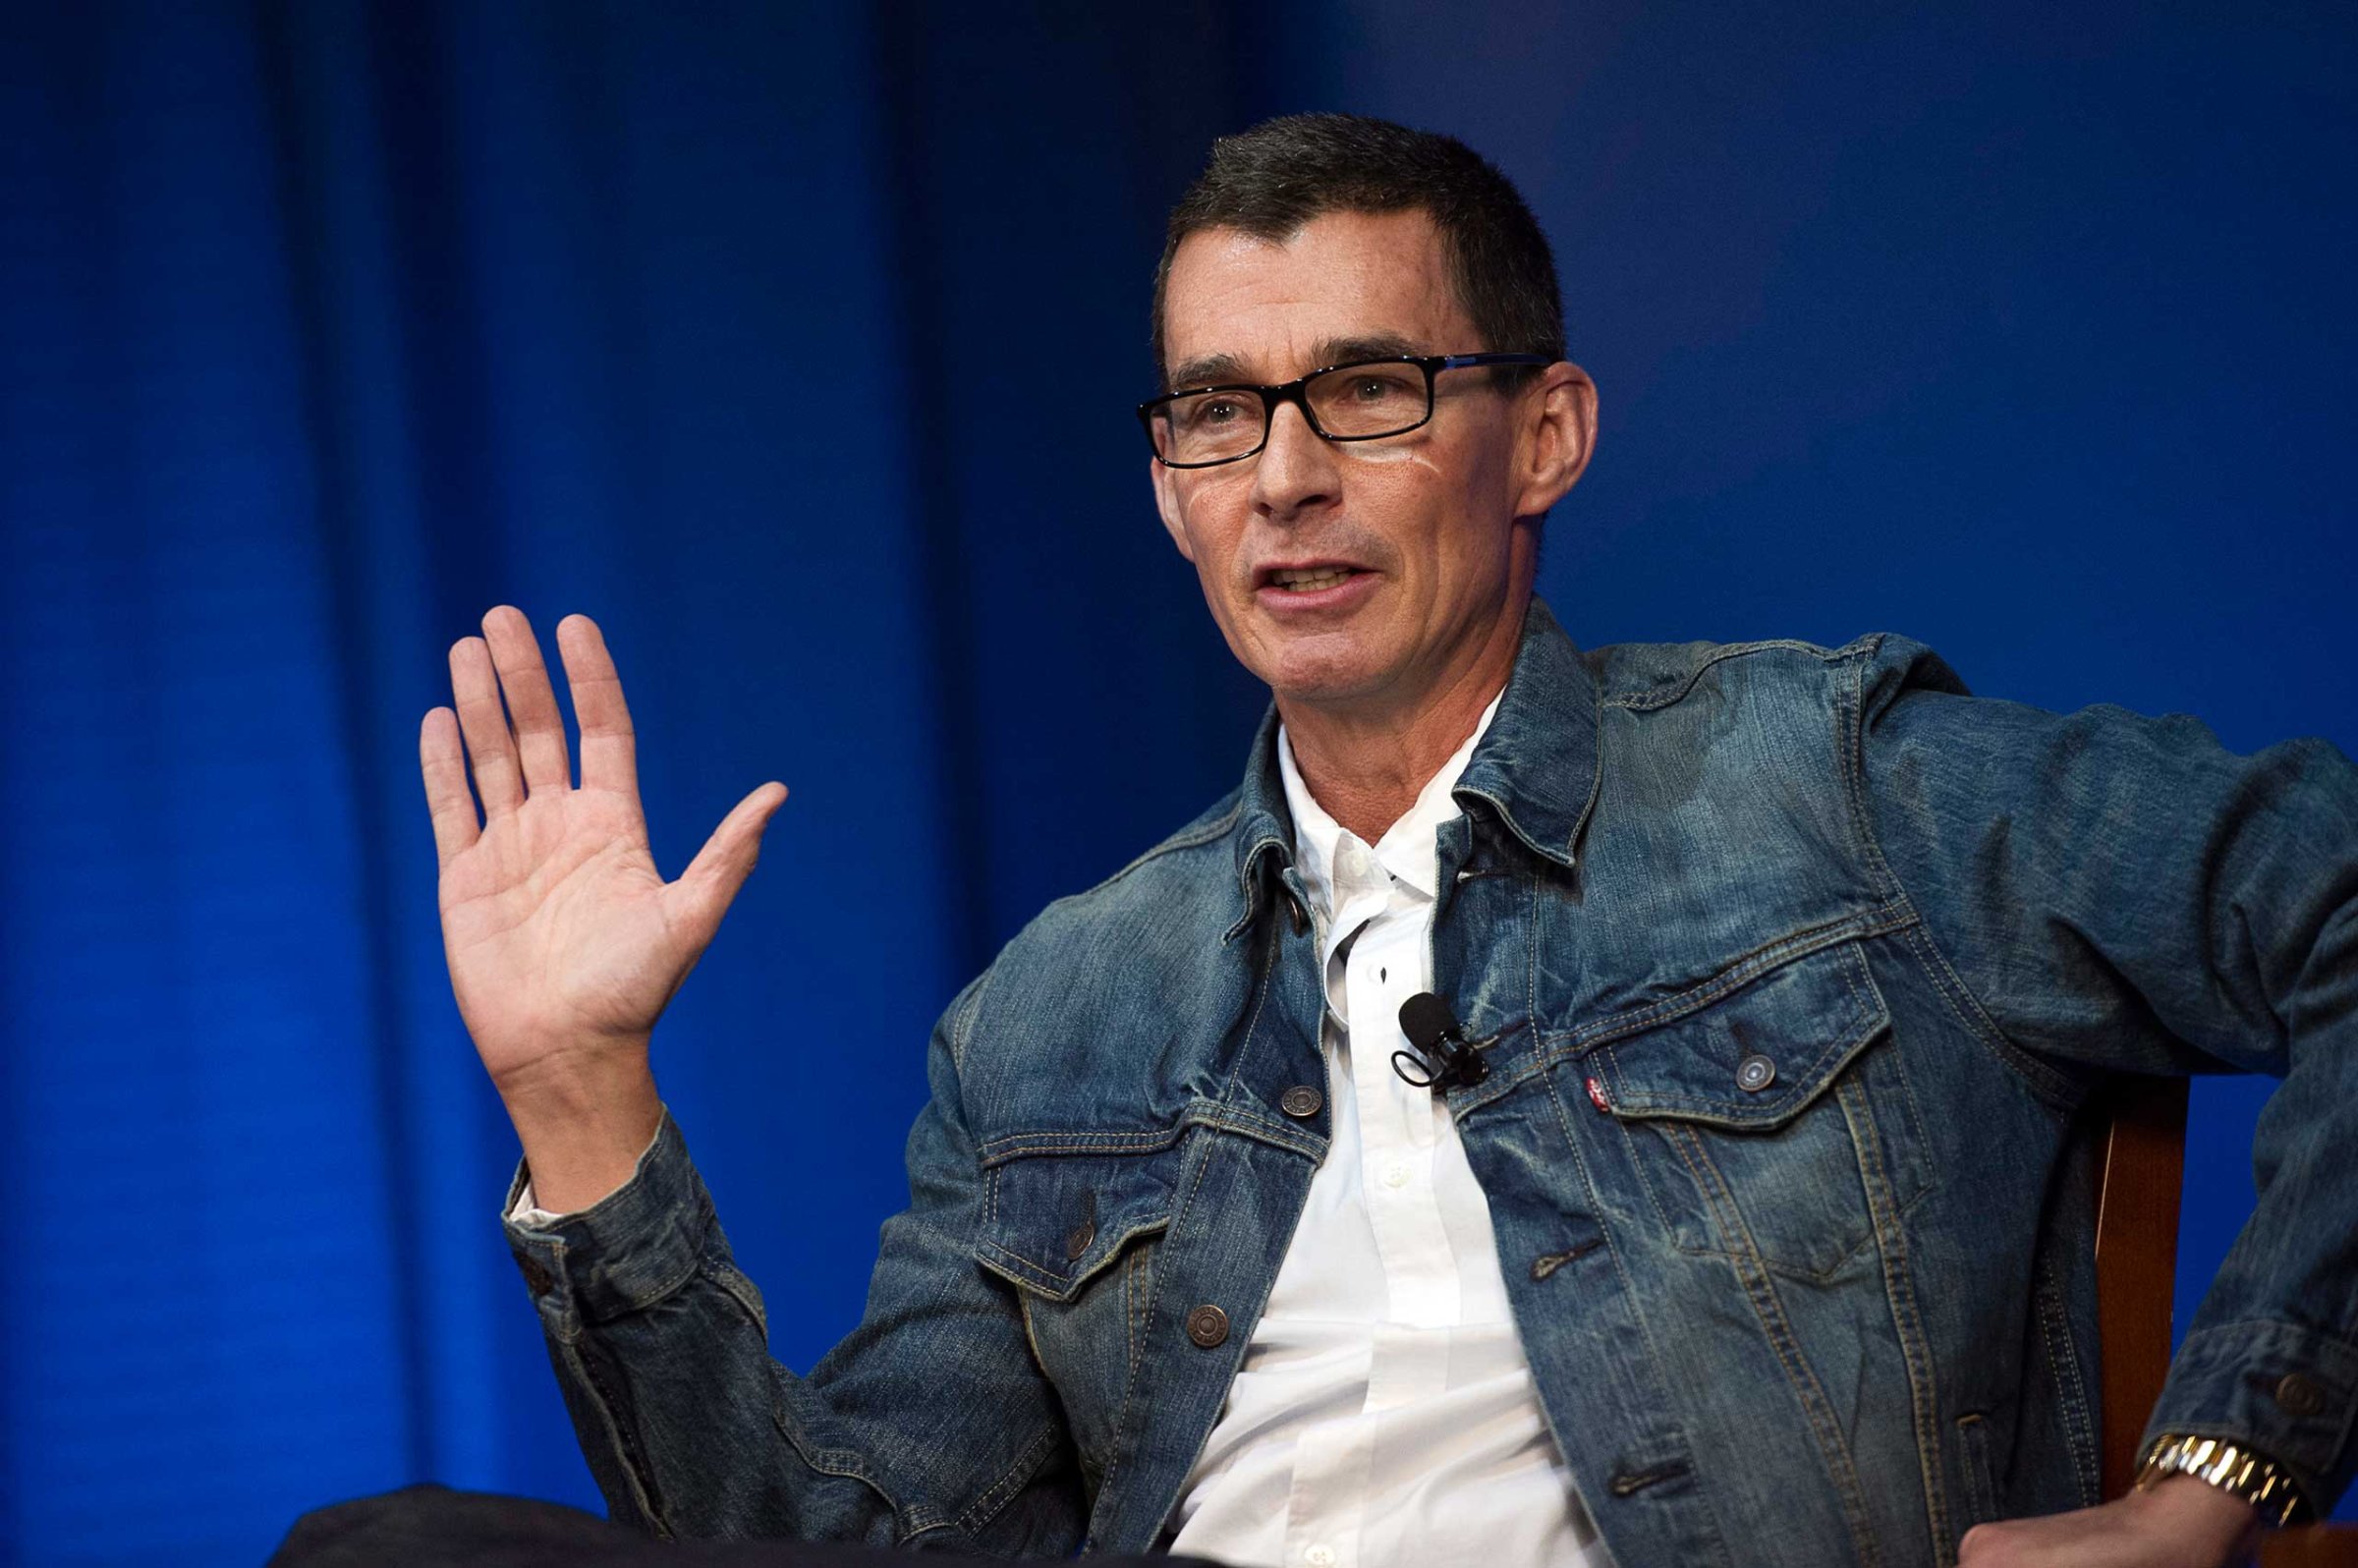 Chip Bergh, chief executive officer at Levis Strauss & Co., in 2013.